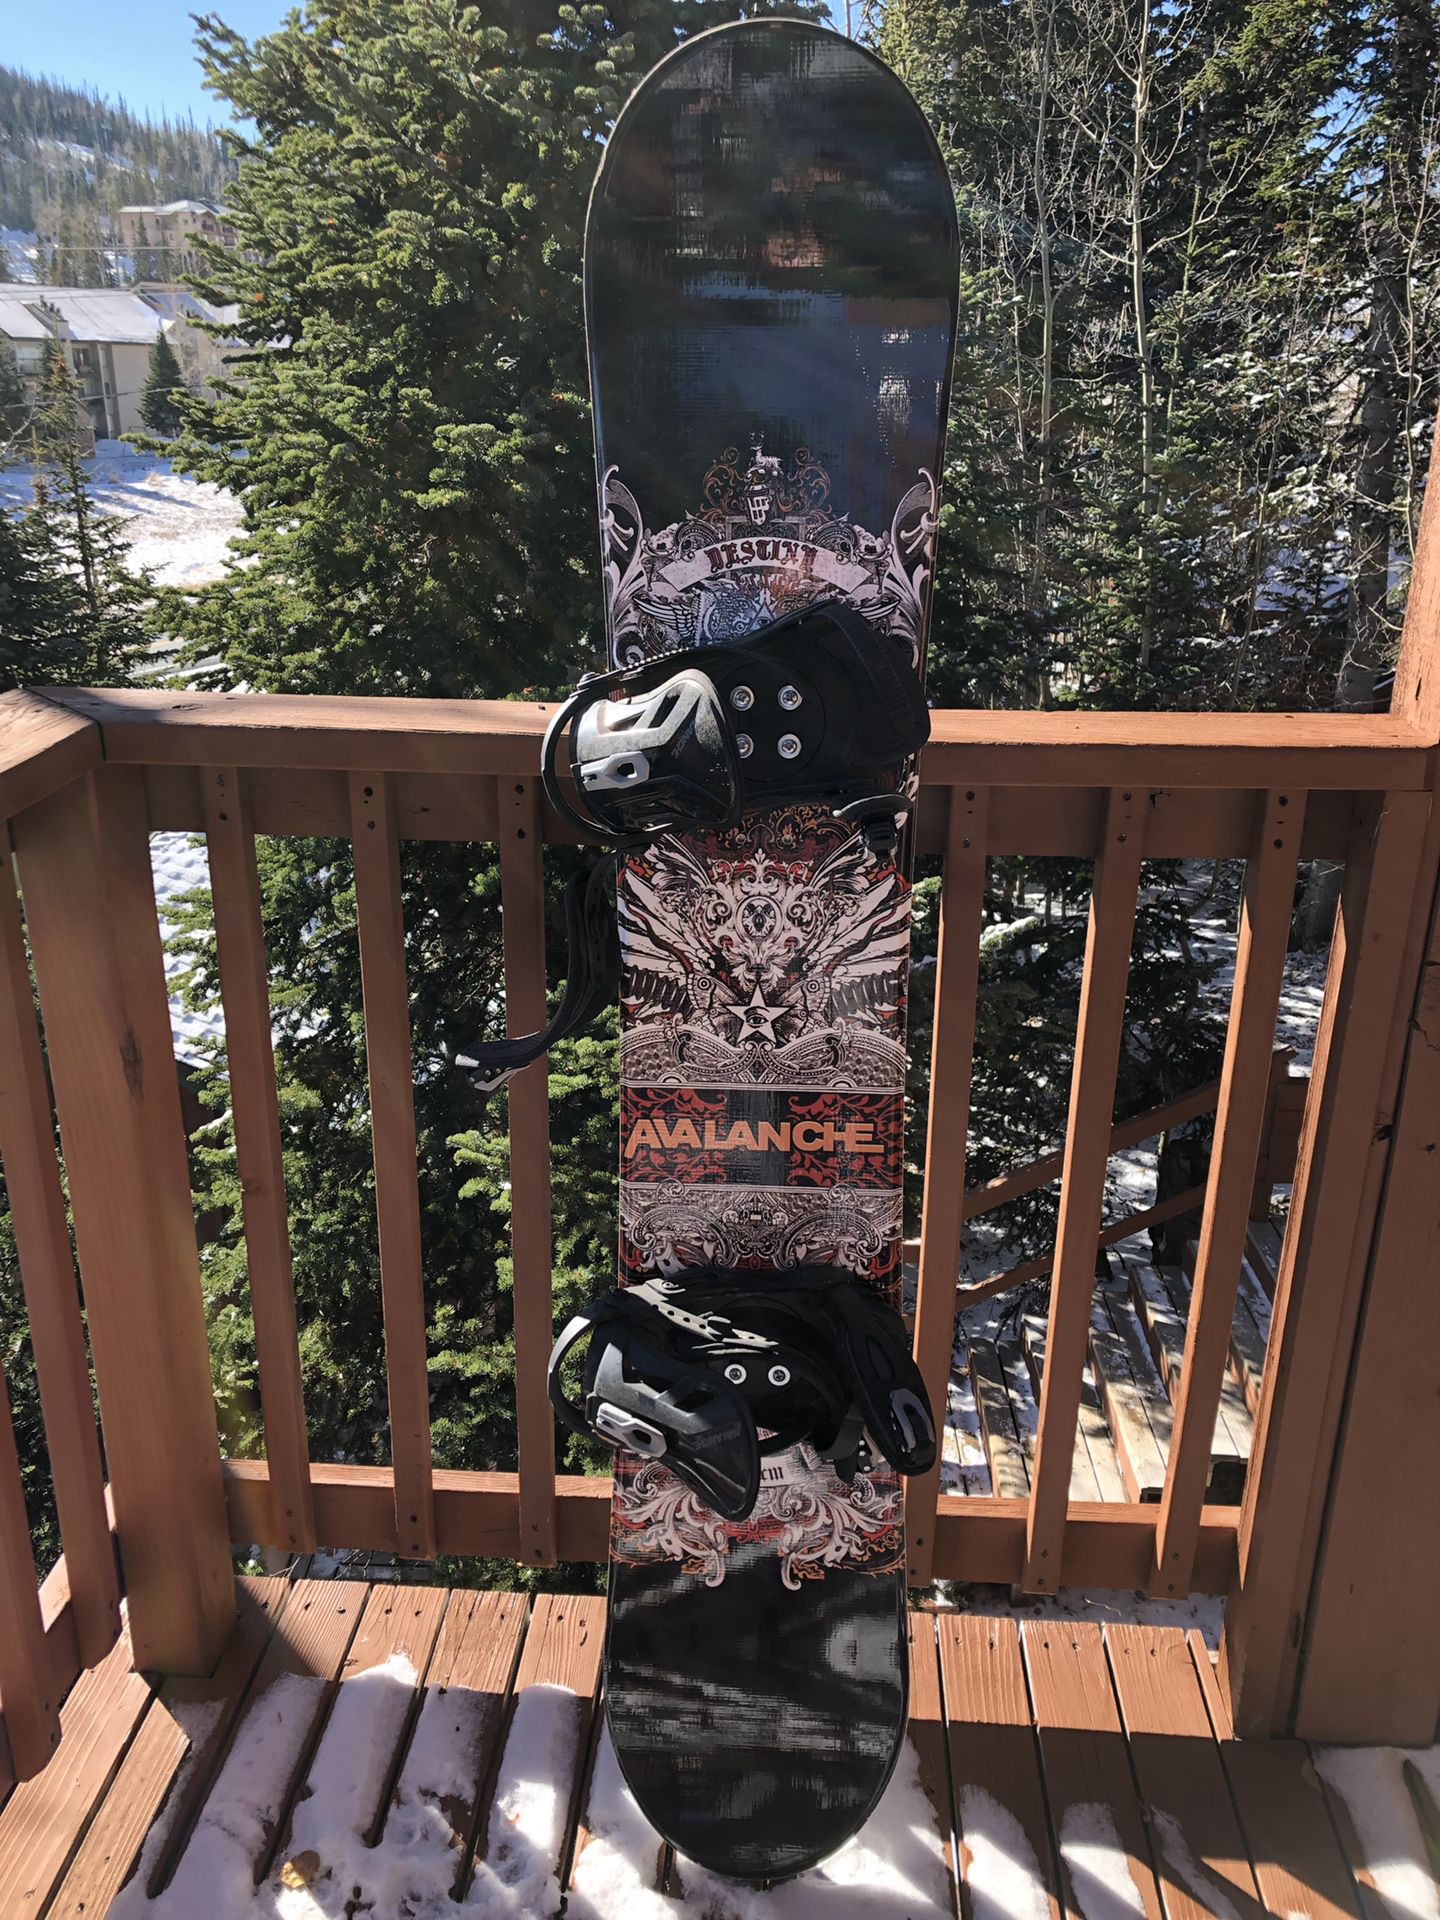 Burton Avalanche Snowboard, Bindings & Boots- used 1 time:)